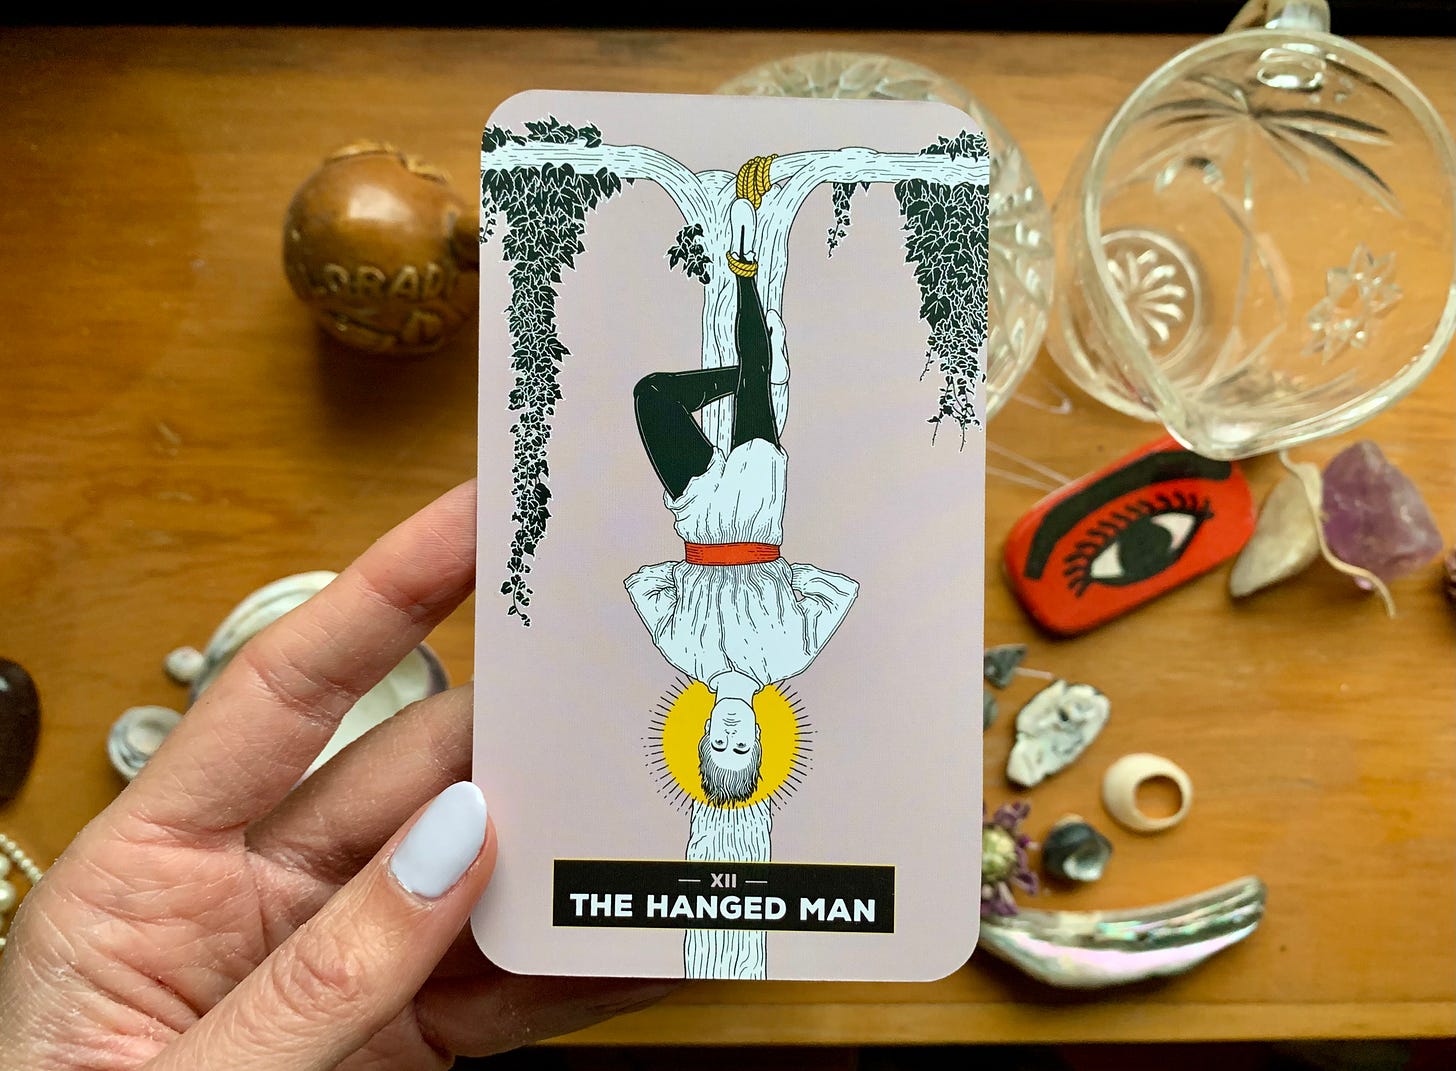 A hand is holding a tarot card, The Hanged Man by Xaviera Lopez from The Change Tarot. In the image a person is hanging from a tree by one foot with the other foot folded behind the straight leg. Their hands are folded behind their back and there is a halo around their head. Their facial expression appears to be restful.